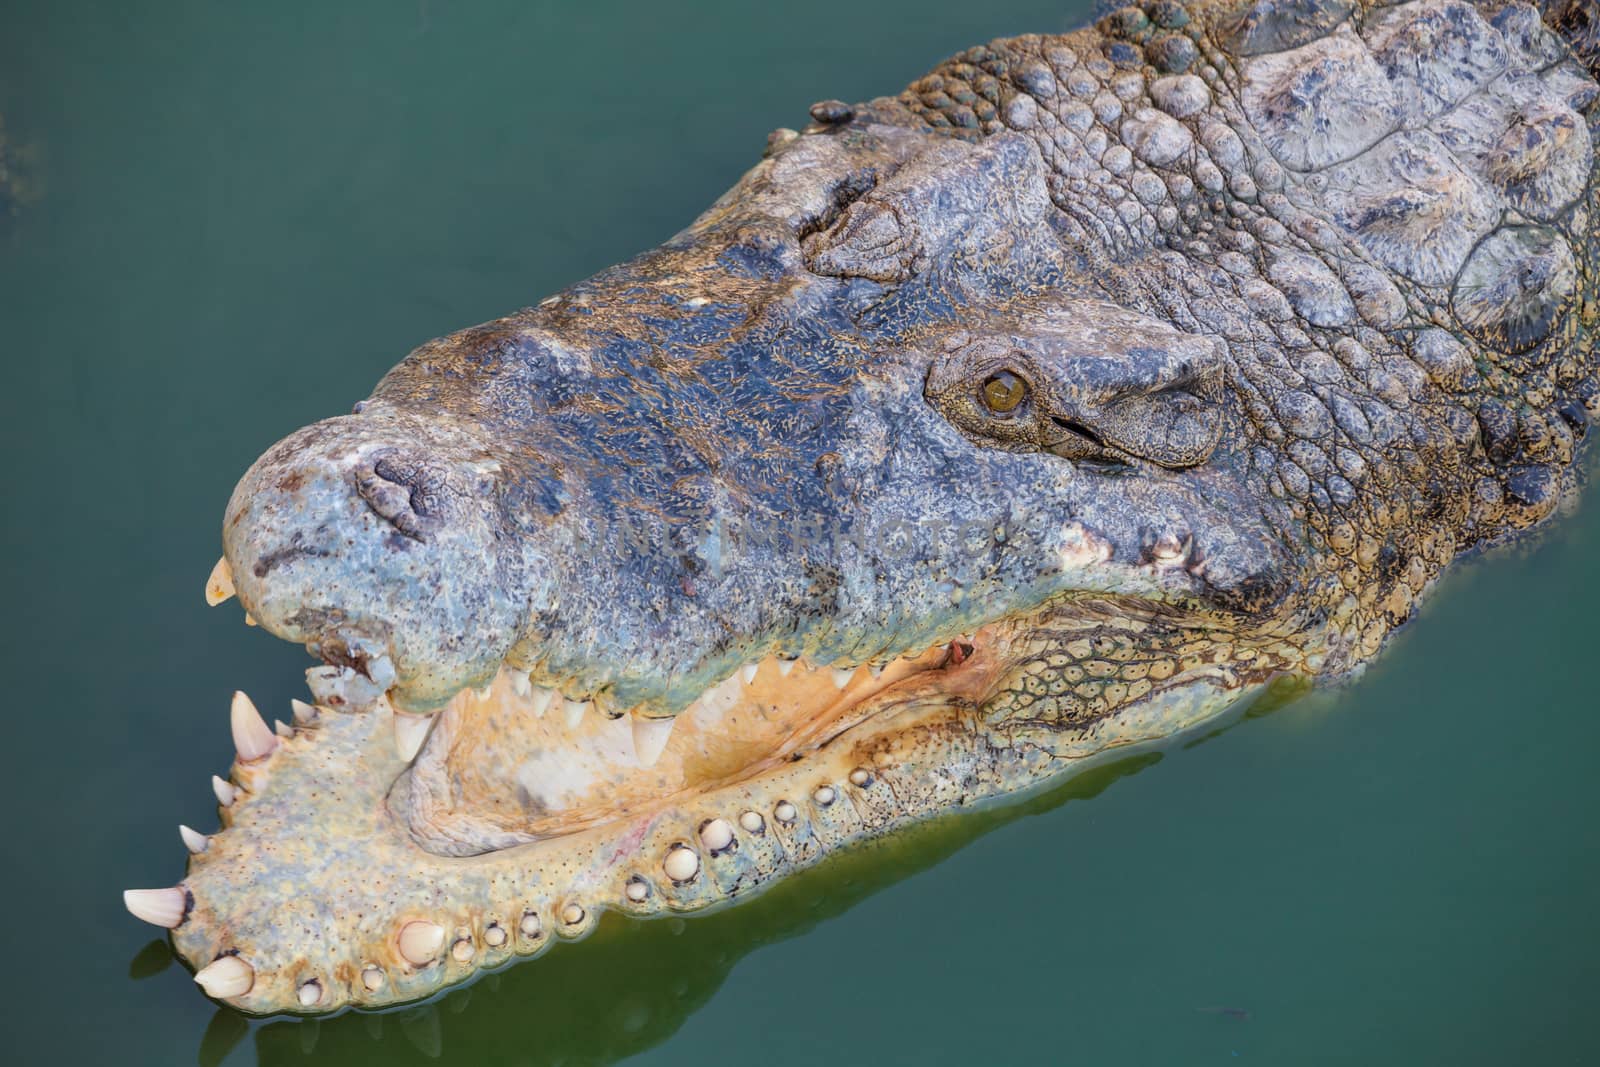 crocodile with open mouth resting in water